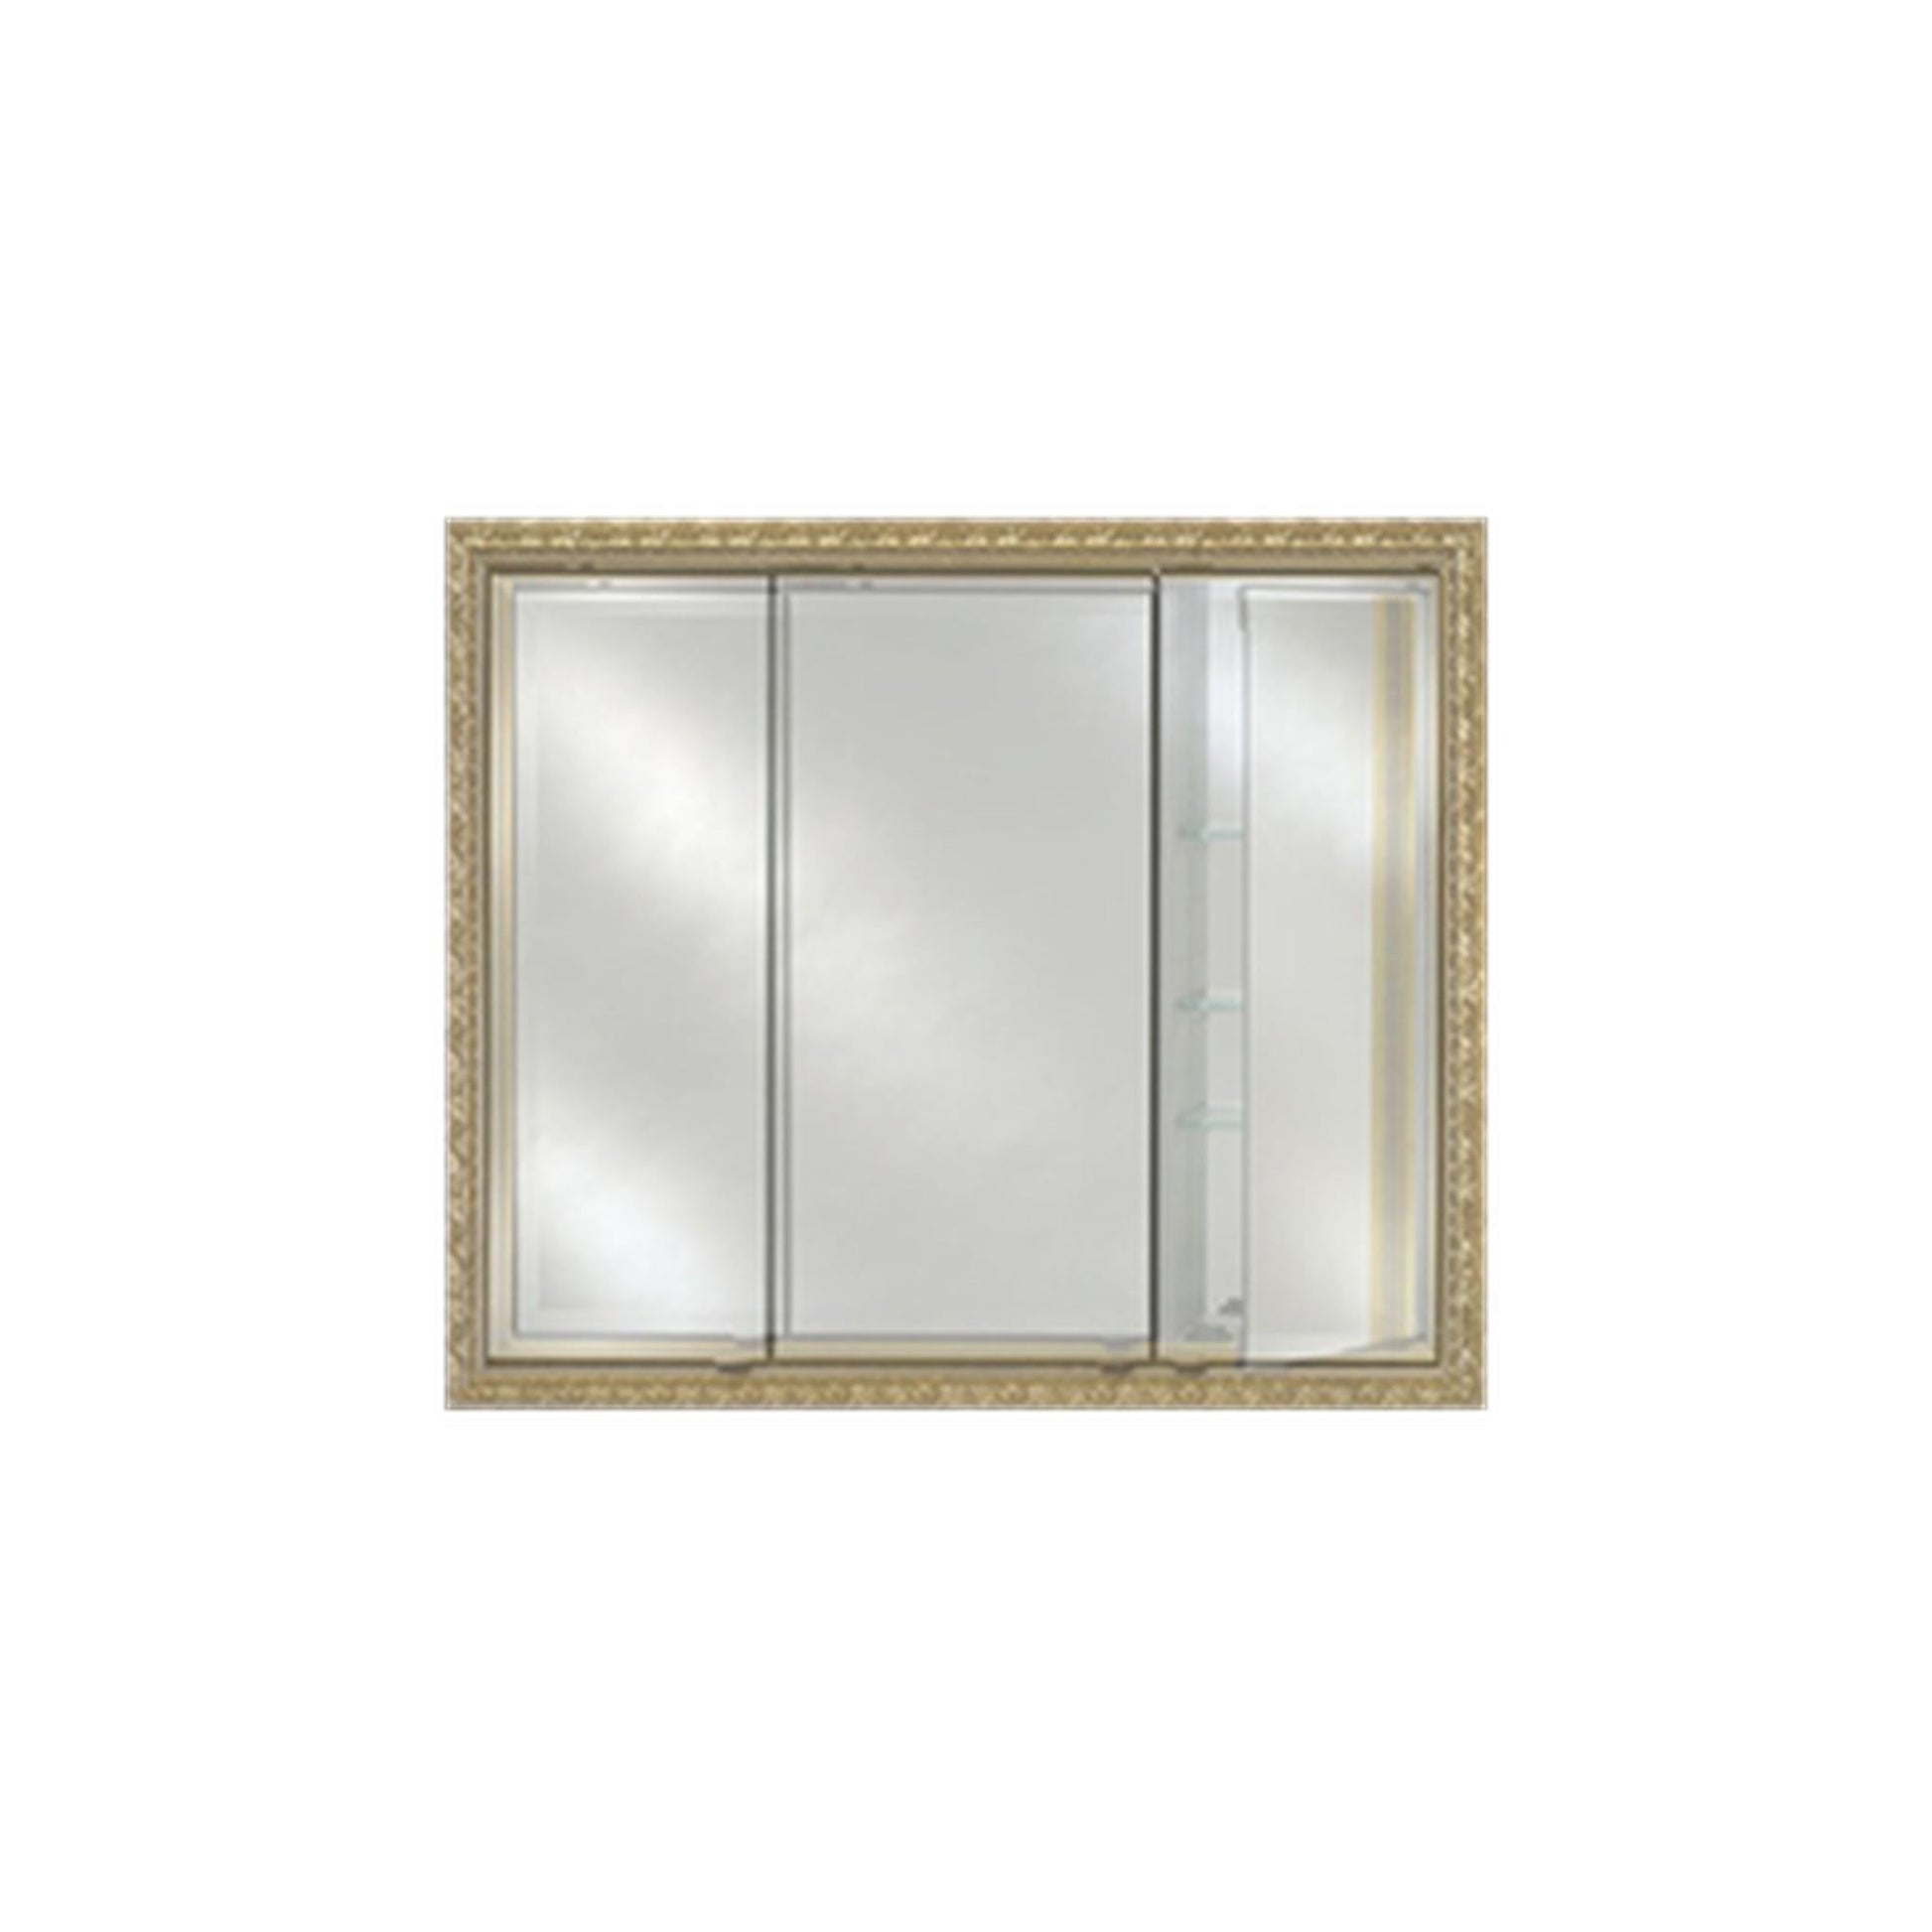 Afina Signature 44" x 30" Polished Glimmer-Flat Recessed Triple Door Medicine Cabinet With Beveled Edge Mirror